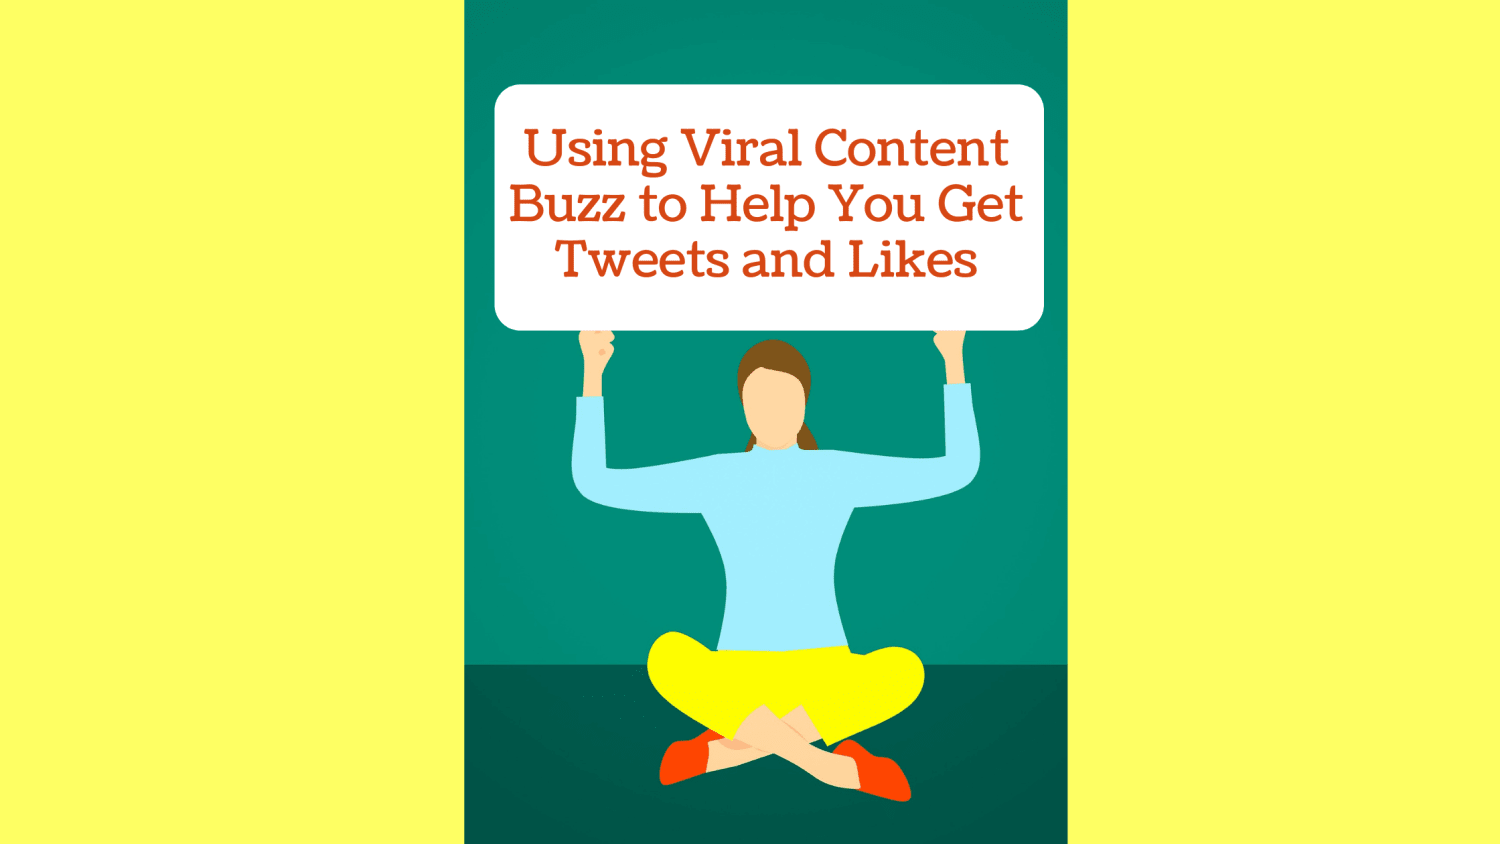 Using Viral Content Buzz to Help You Get Tweets and Likes